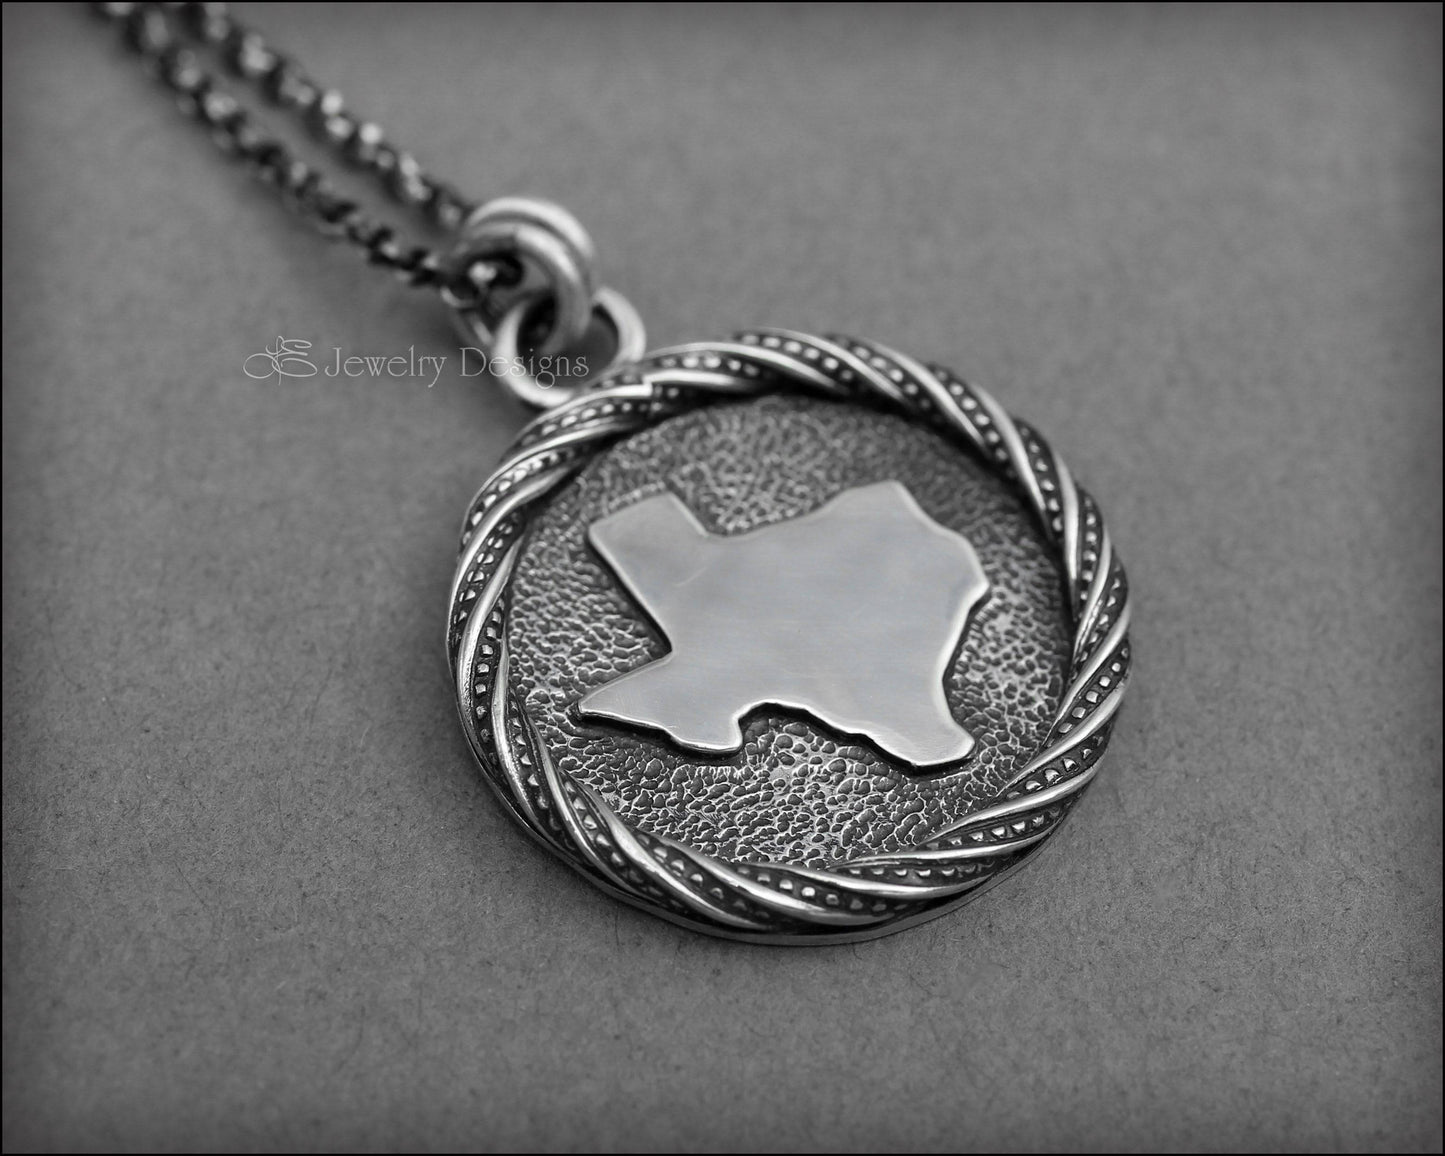 Sterling Texas Medallion Pendant - LE Jewelry Designs